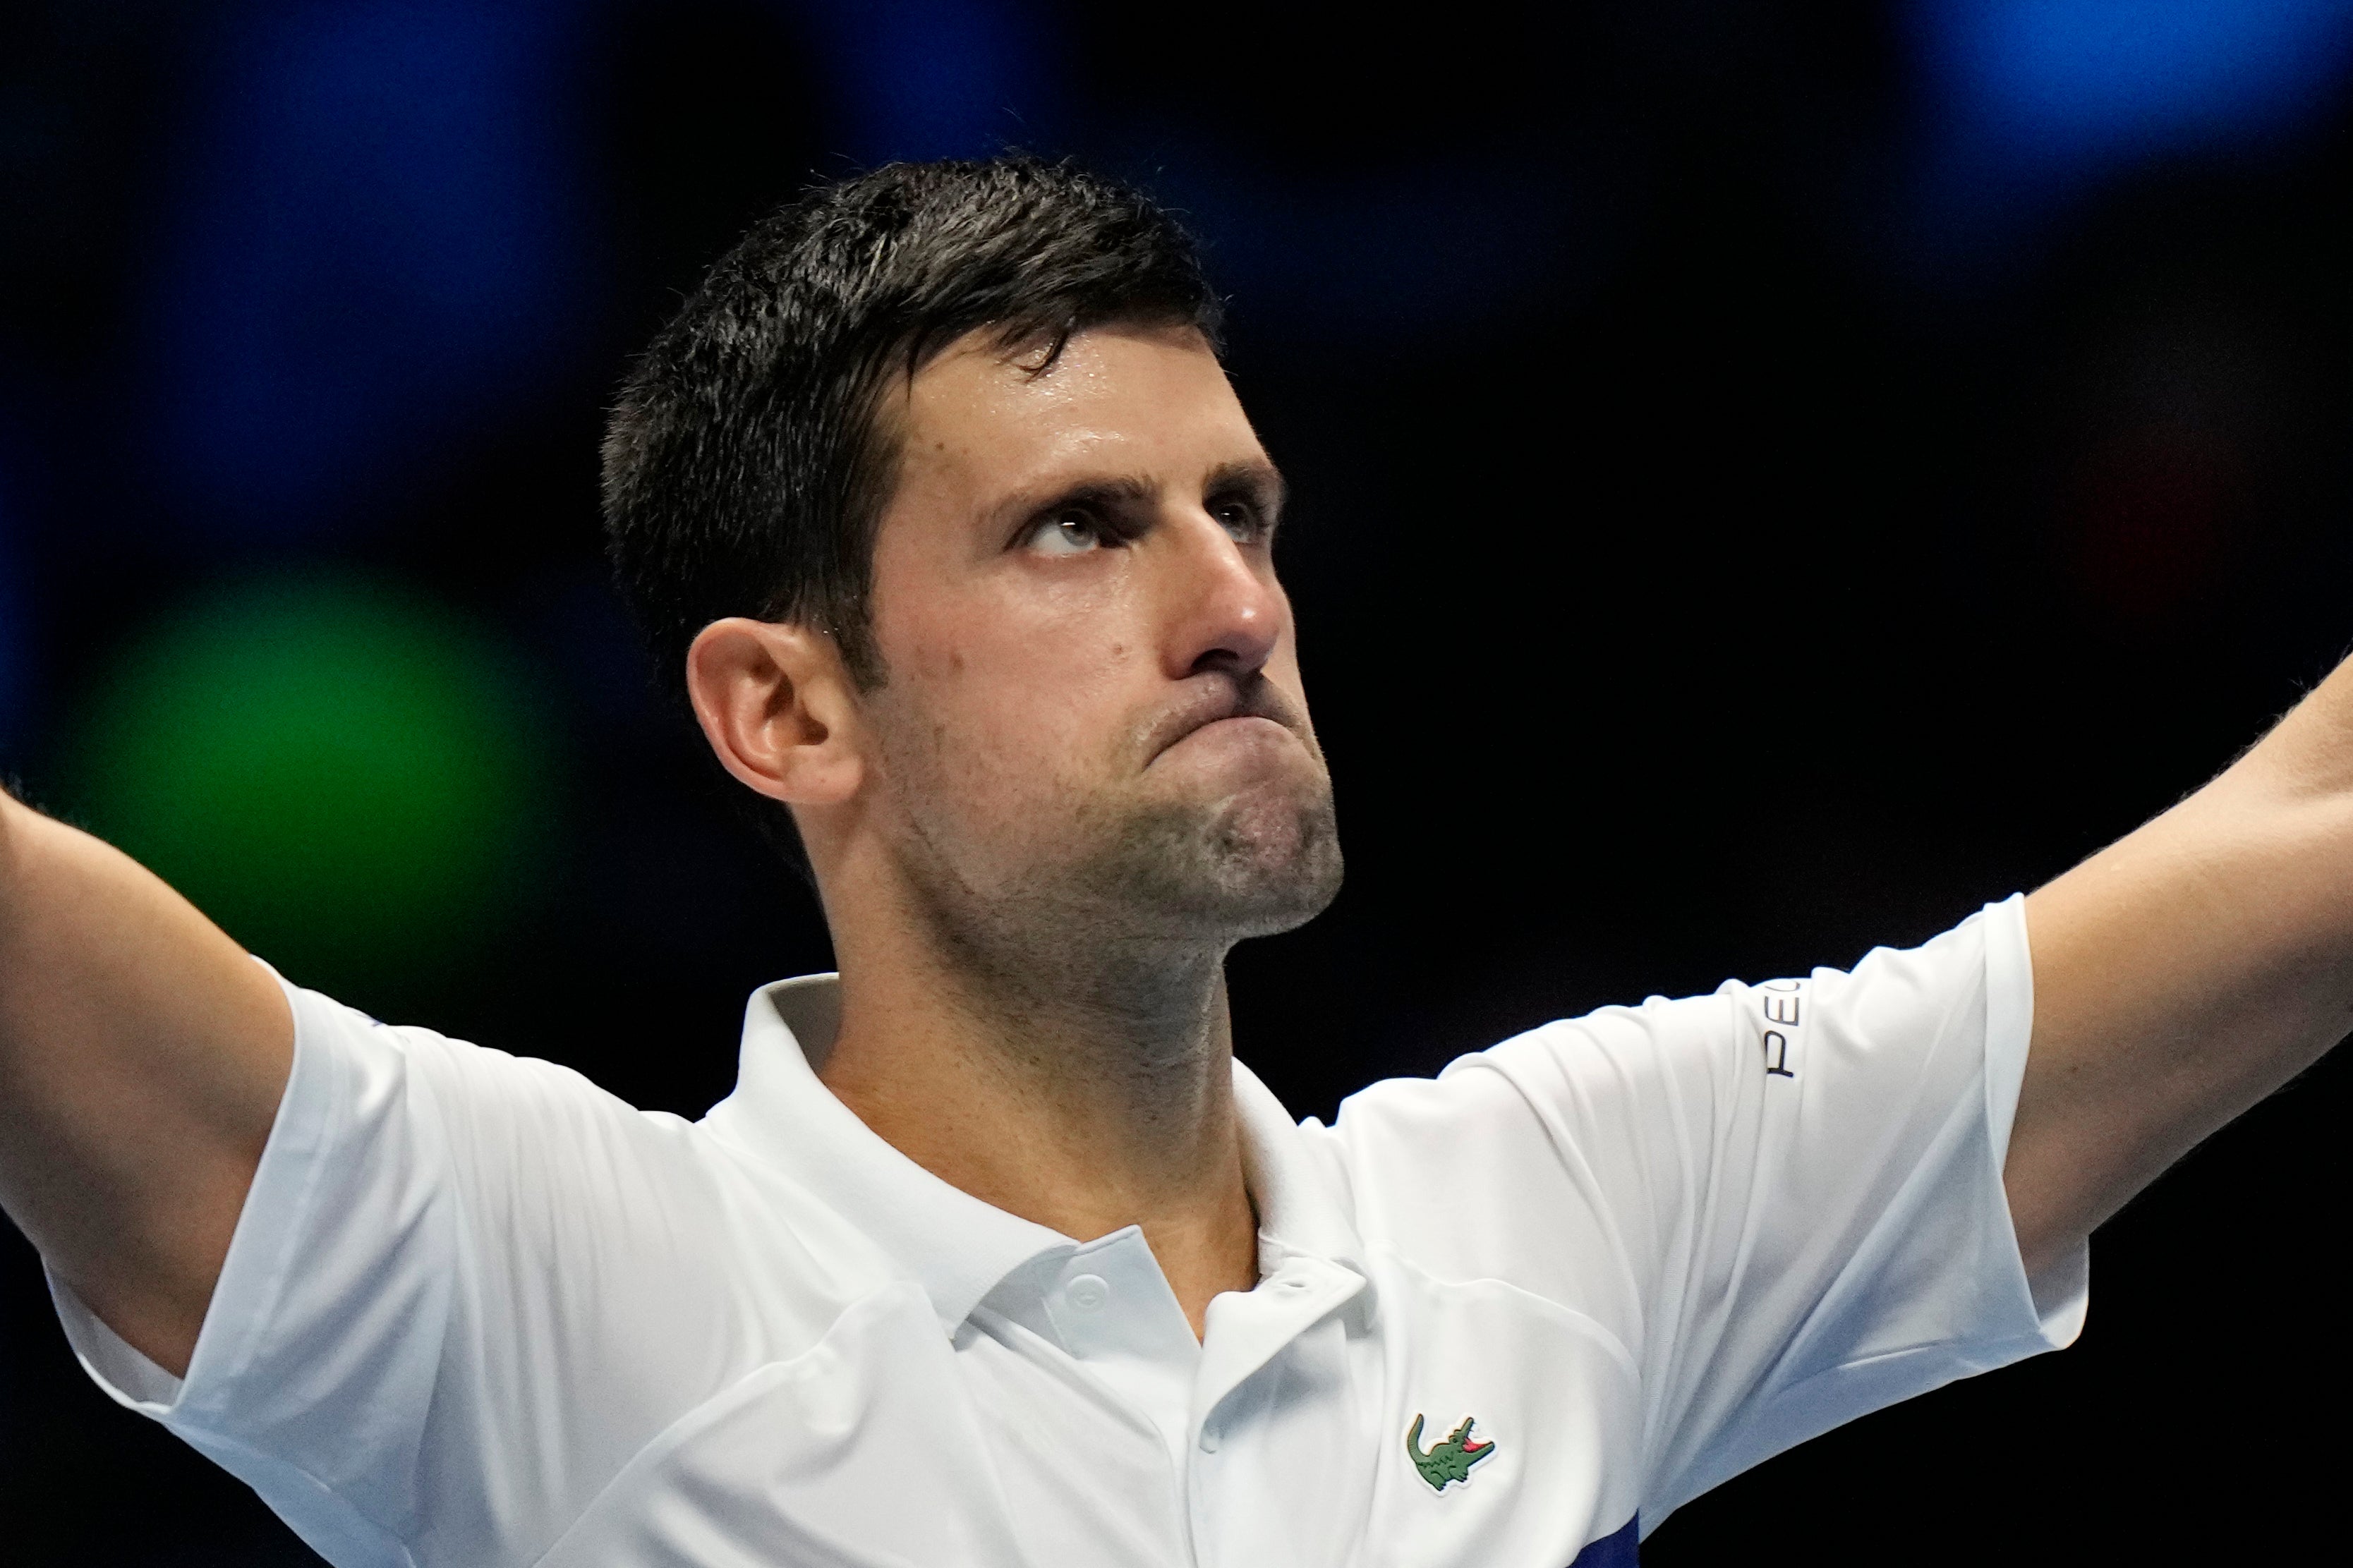 Novak Djokovic is refusing to say whether he has been vaccinated